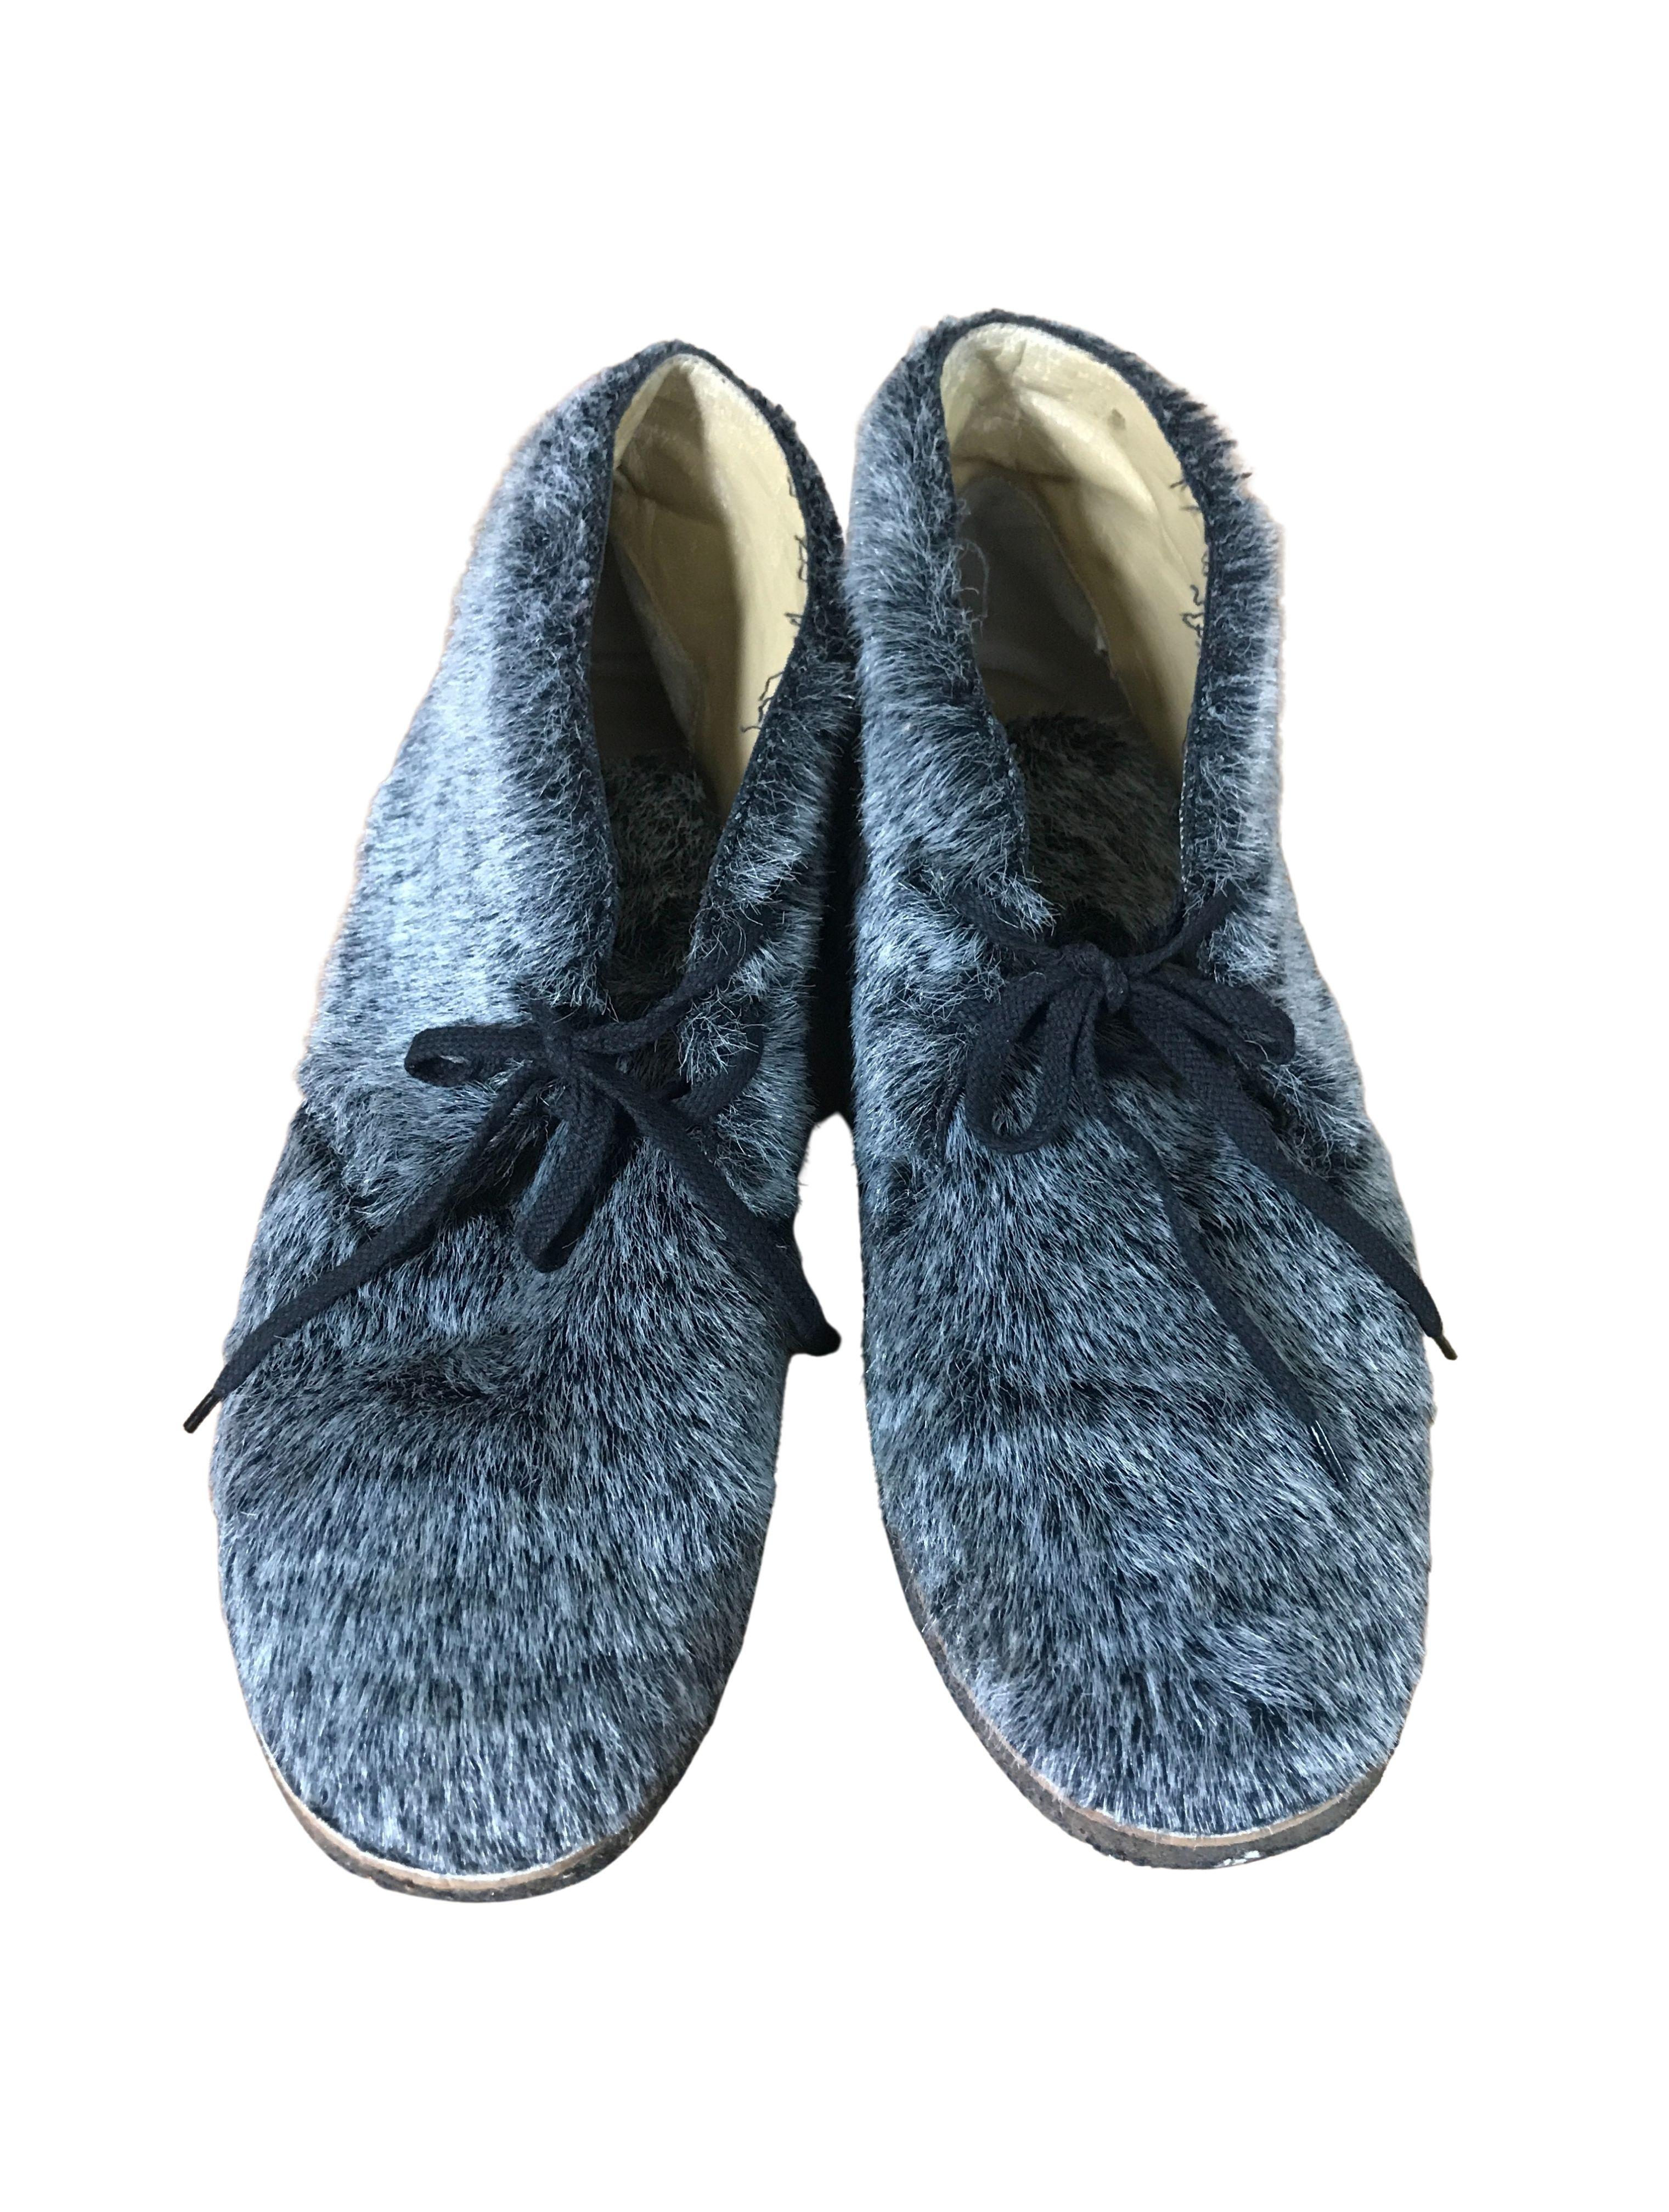 blue fuzzy boots